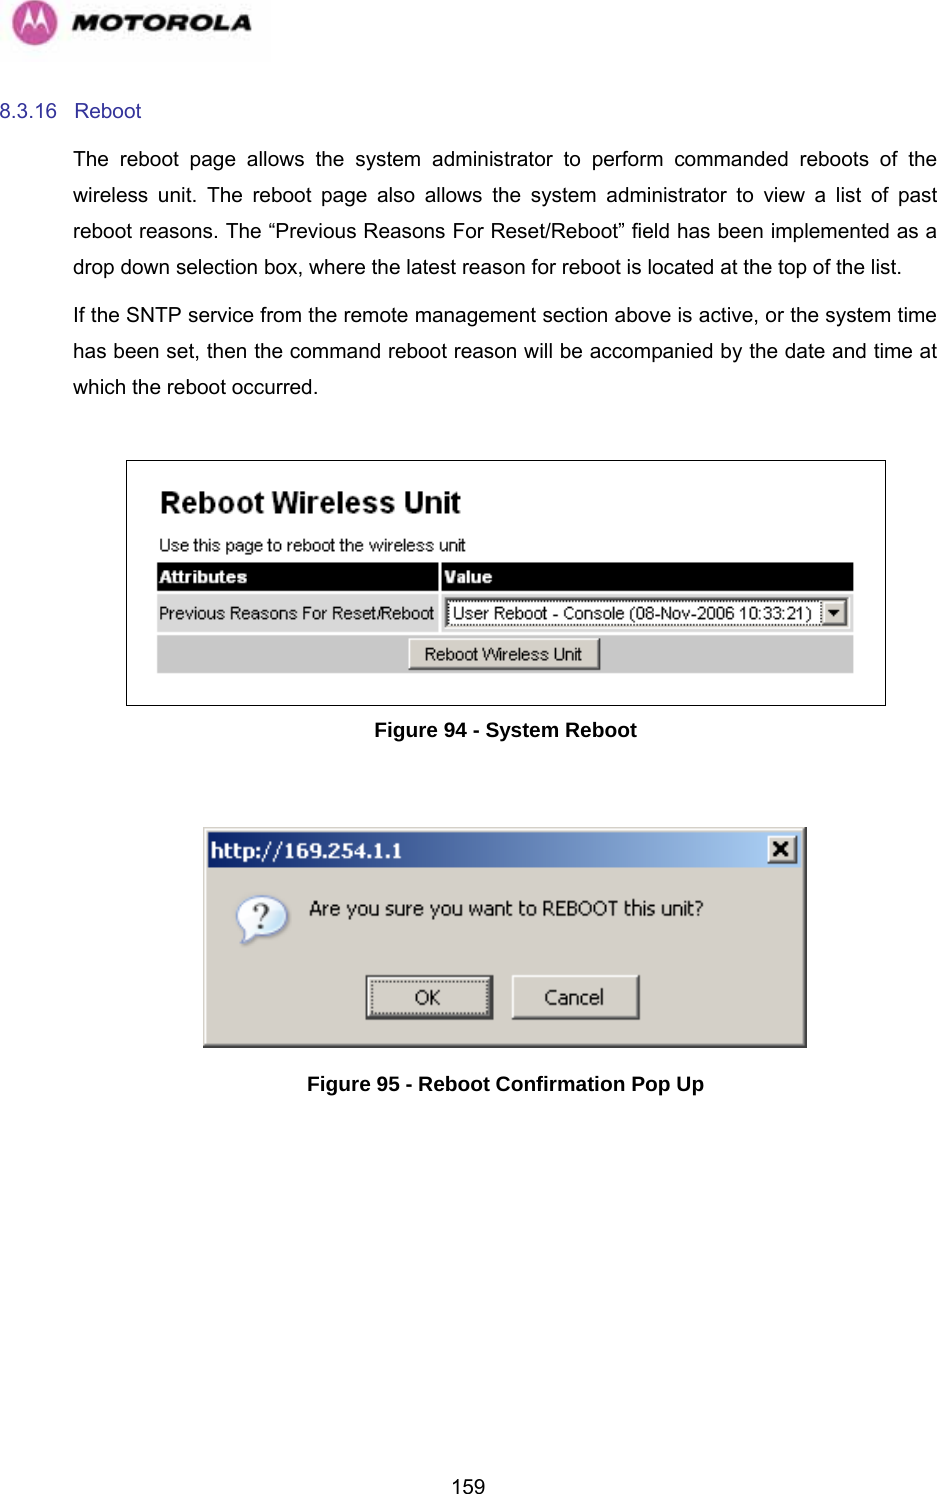   1598.3.16 Reboot  The reboot page allows the system administrator to perform commanded reboots of the wireless unit. The reboot page also allows the system administrator to view a list of past reboot reasons. The “Previous Reasons For Reset/Reboot” field has been implemented as a drop down selection box, where the latest reason for reboot is located at the top of the list. If the SNTP service from the remote management section above is active, or the system time has been set, then the command reboot reason will be accompanied by the date and time at which the reboot occurred.   Figure 94 - System Reboot   Figure 95 - Reboot Confirmation Pop Up 